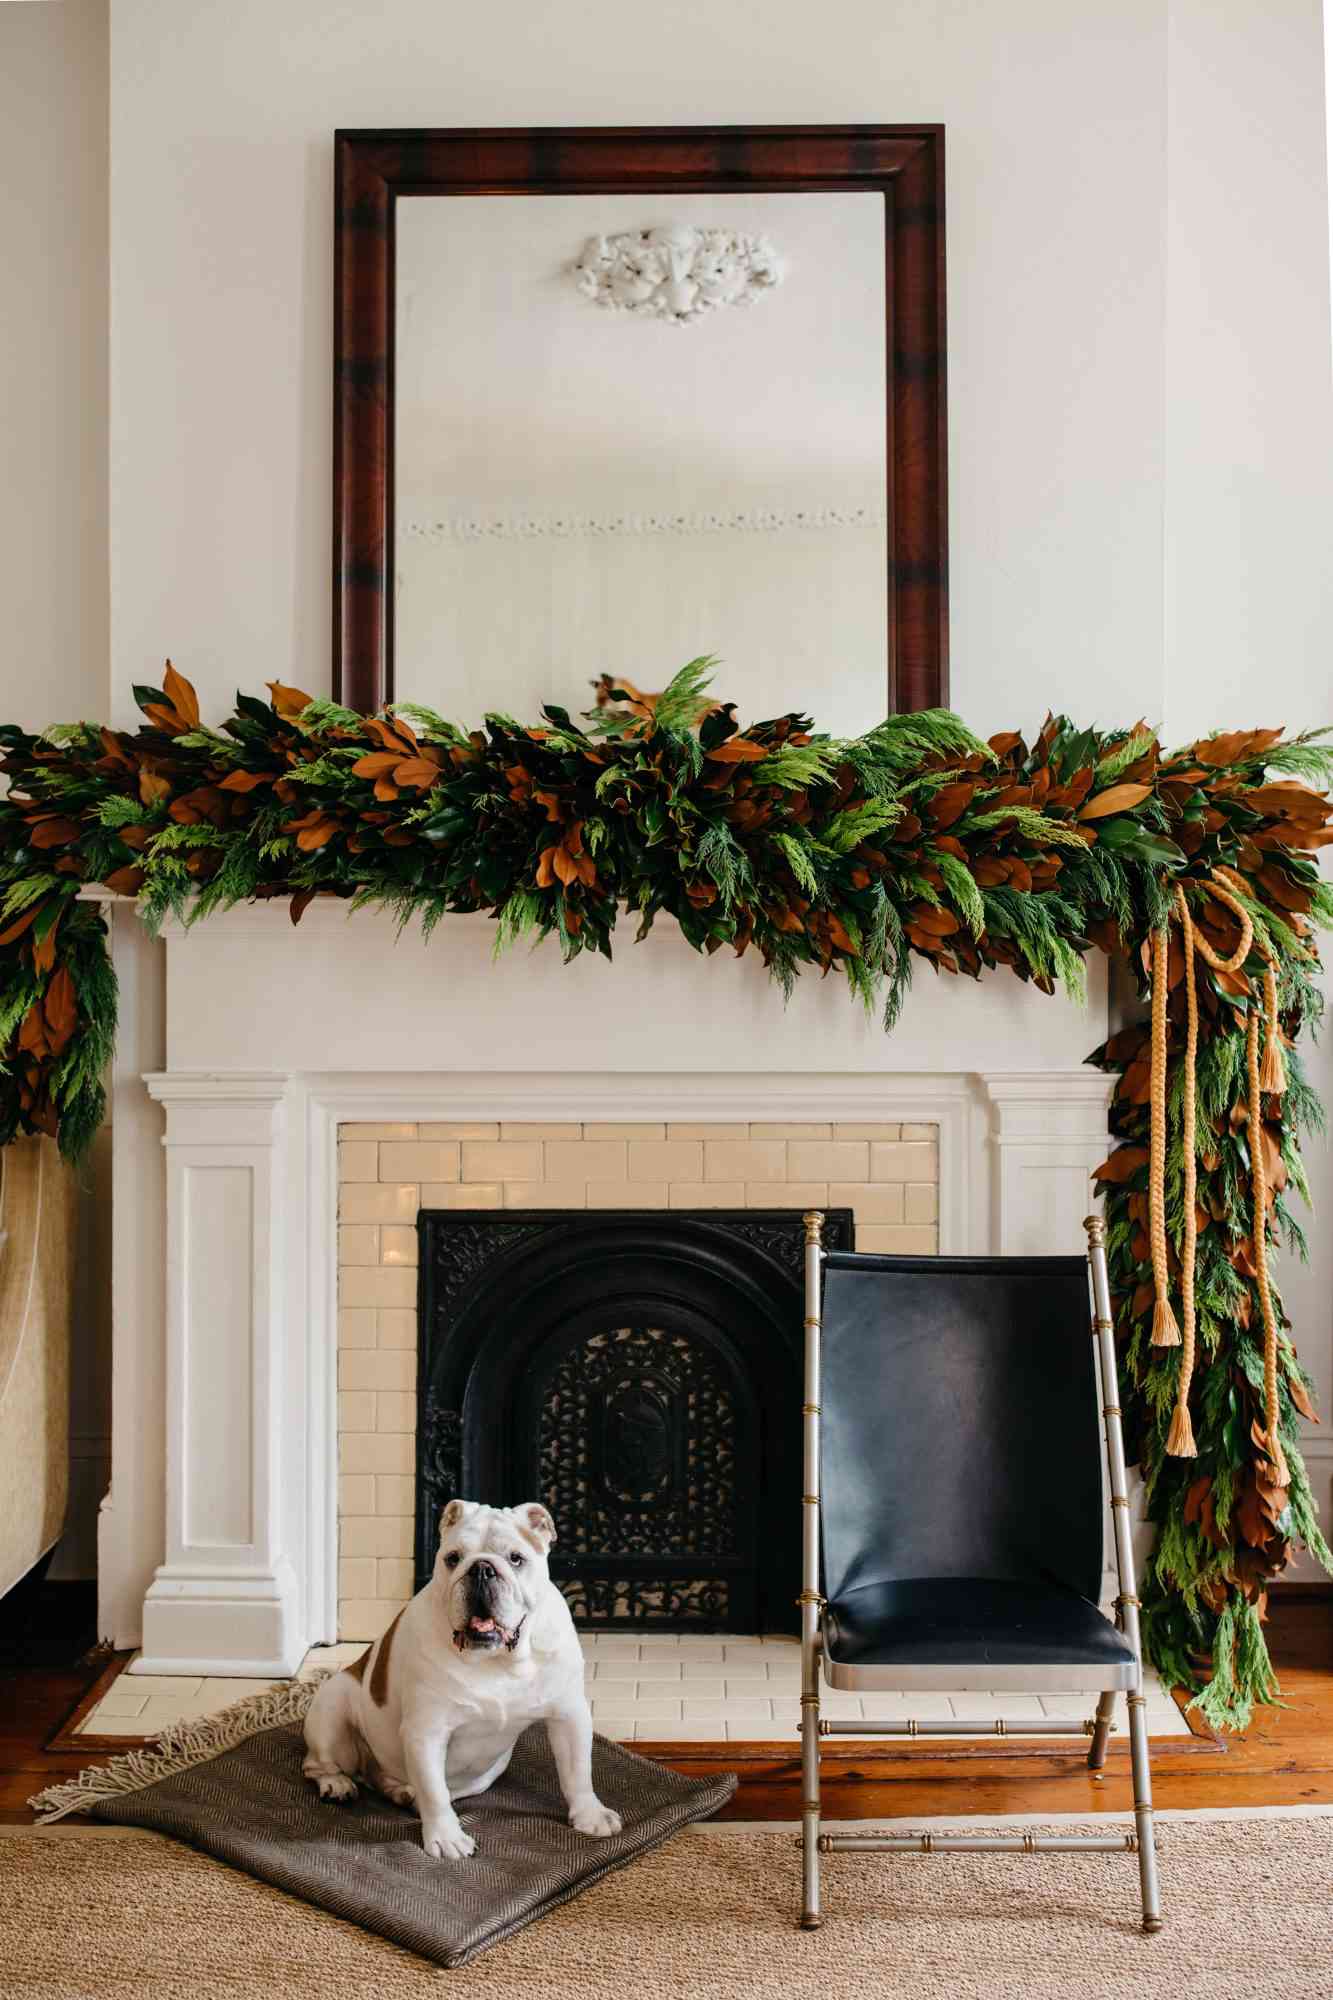 A Garland Over the Mantel Fireplace